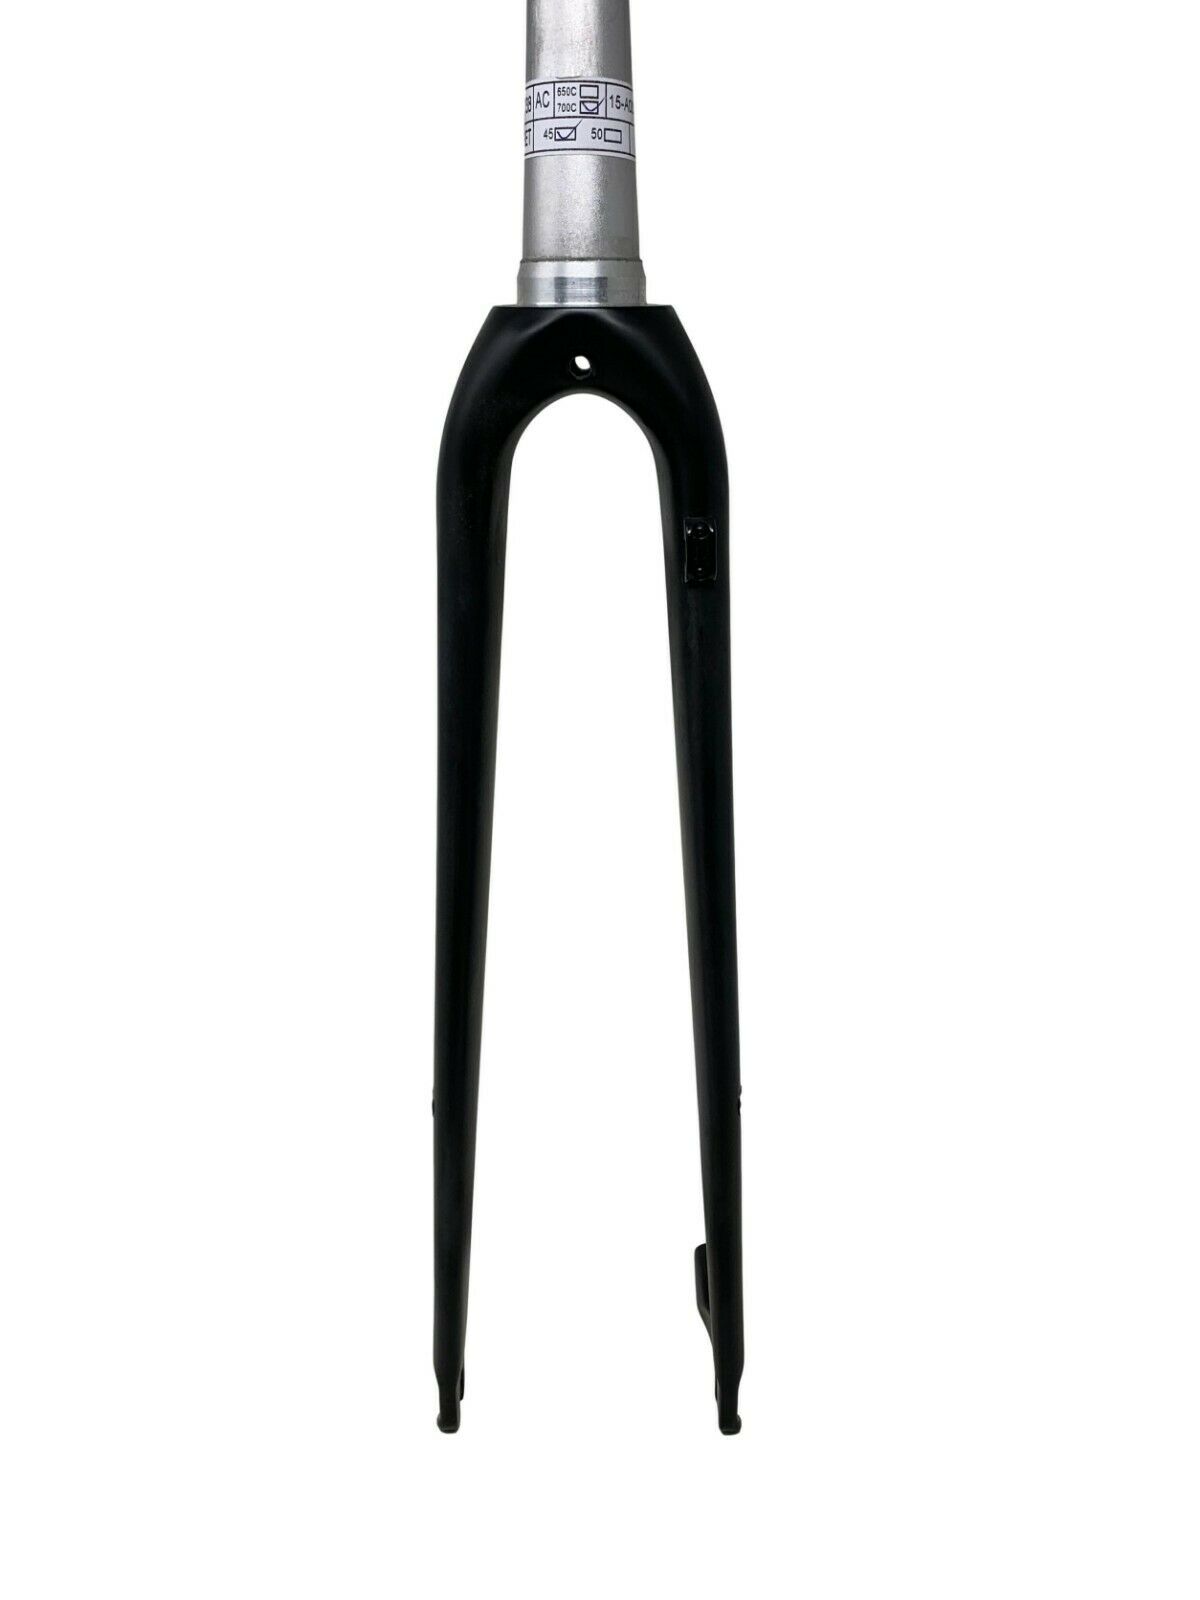 Raleigh RX Comp Carbon Bike Fork 700c - Tapered Alloy Streerer 1.5 - 1.1/8" - Sportandleisure.com (6967881990298)